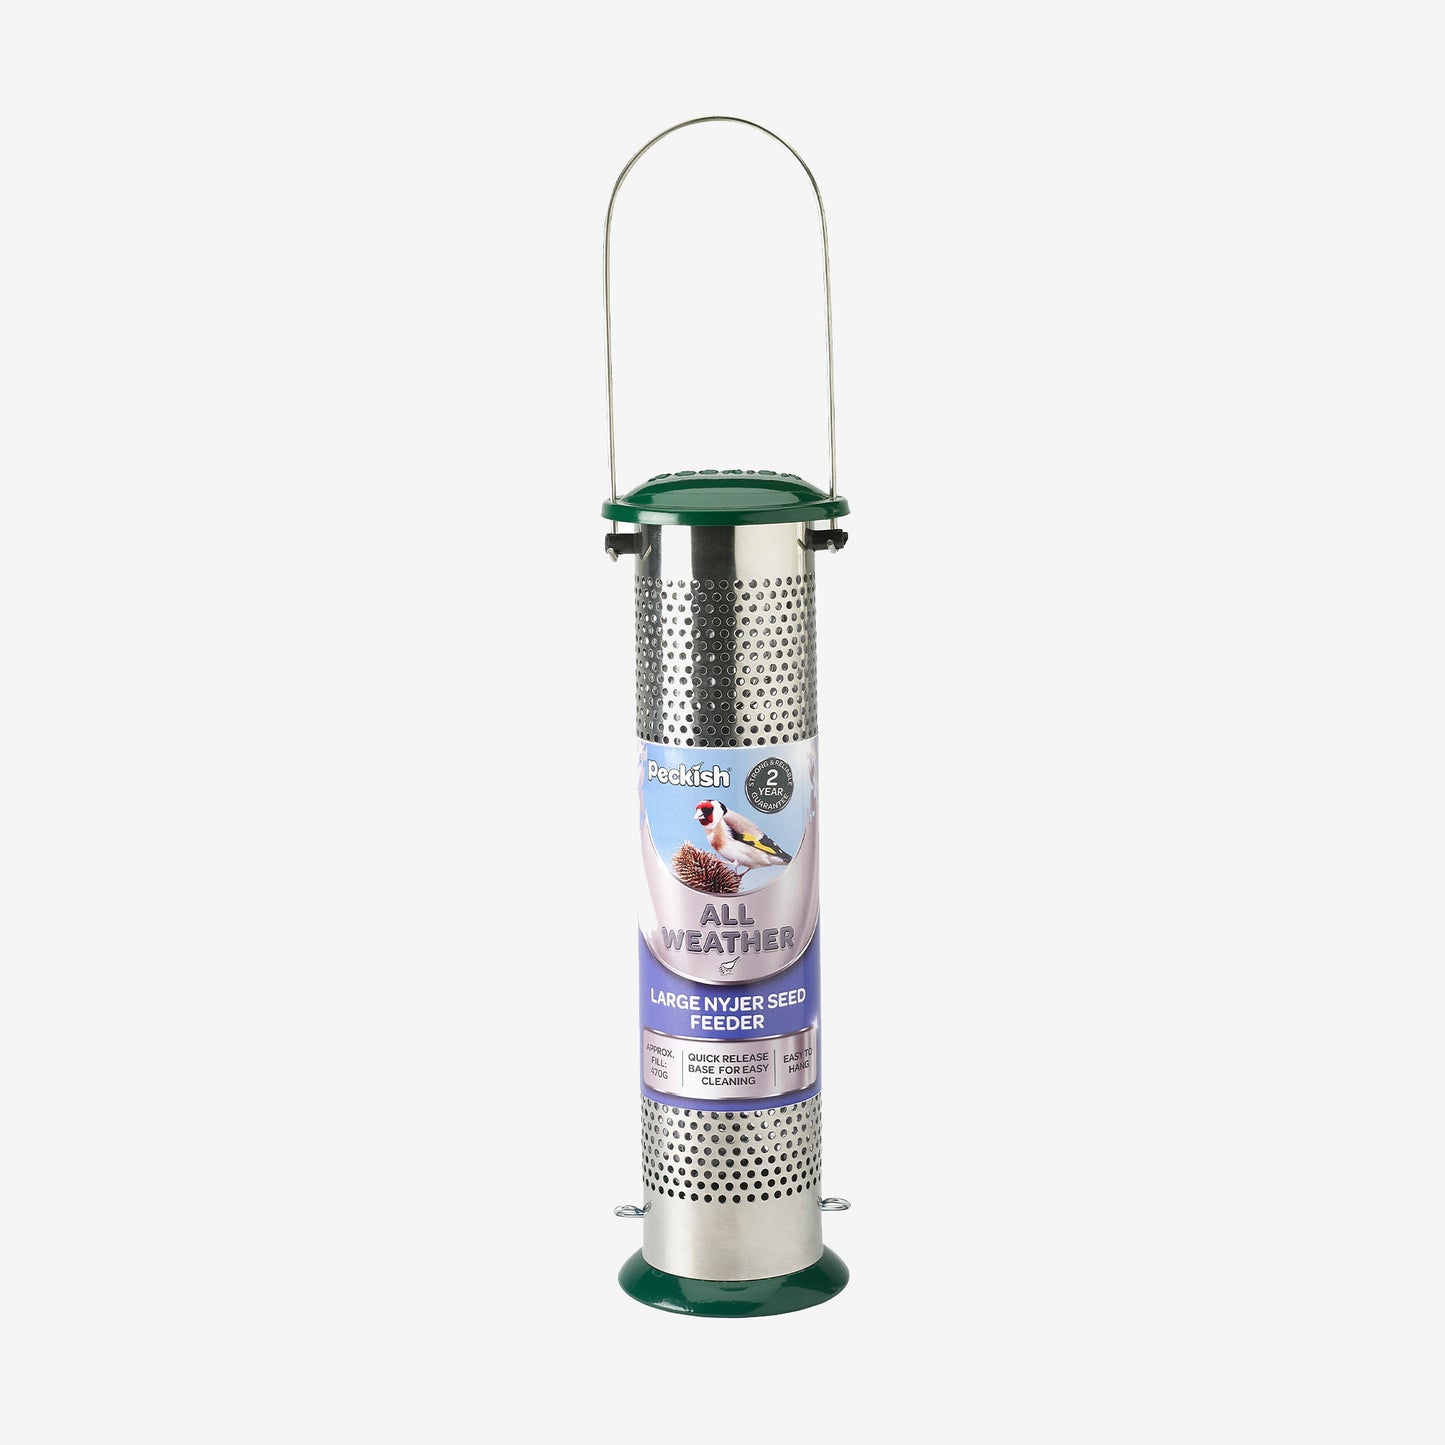 Peckish All Weather Nyjer Seed Feeder in packaging